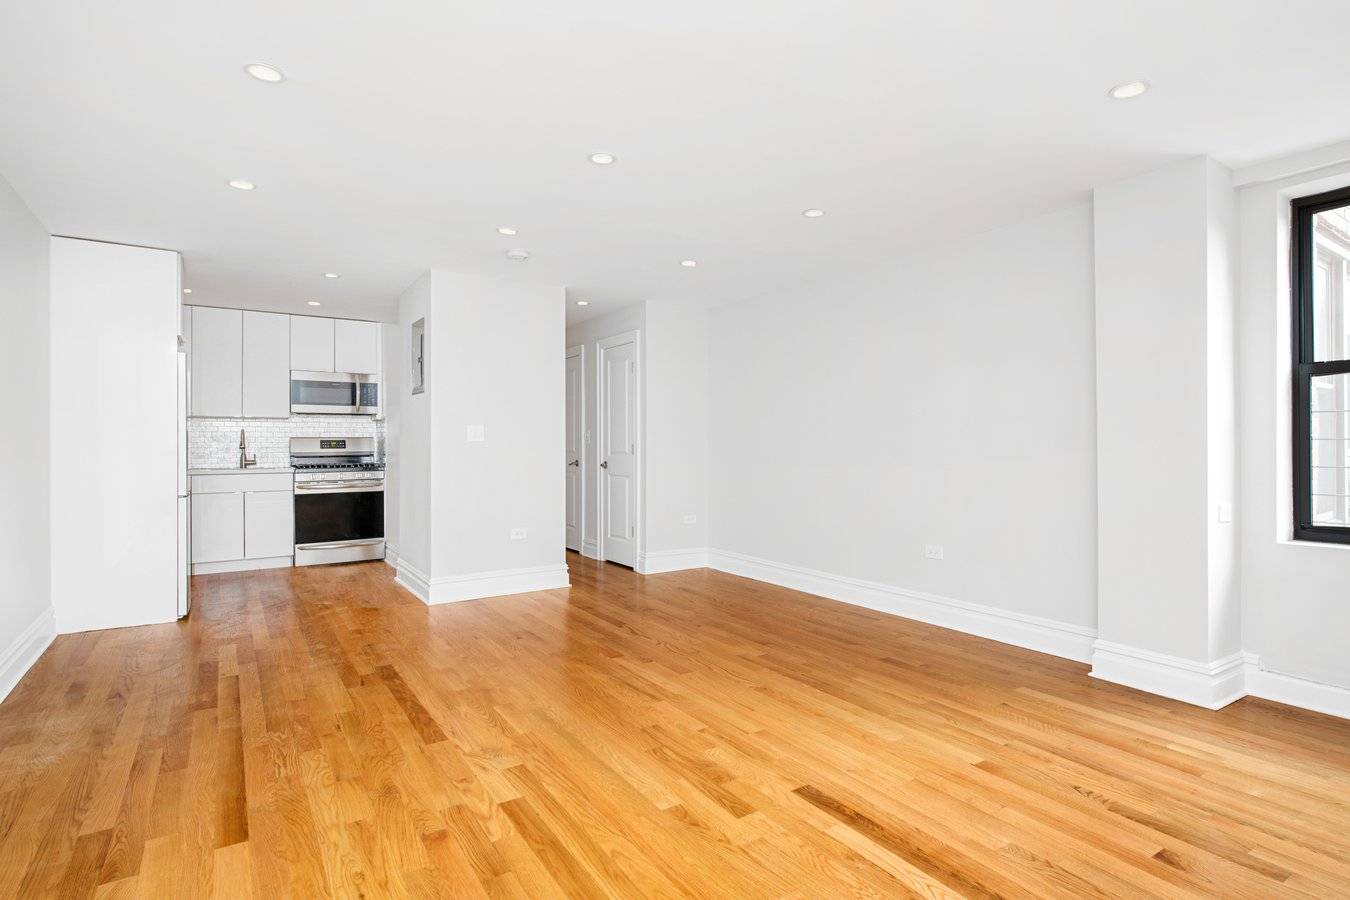 Modern, gut renovated studio apartment featuring new oak hardwood floors, separate kitchen with Quartz counter tops, stainless steel appliances and a glass tiled back splash.